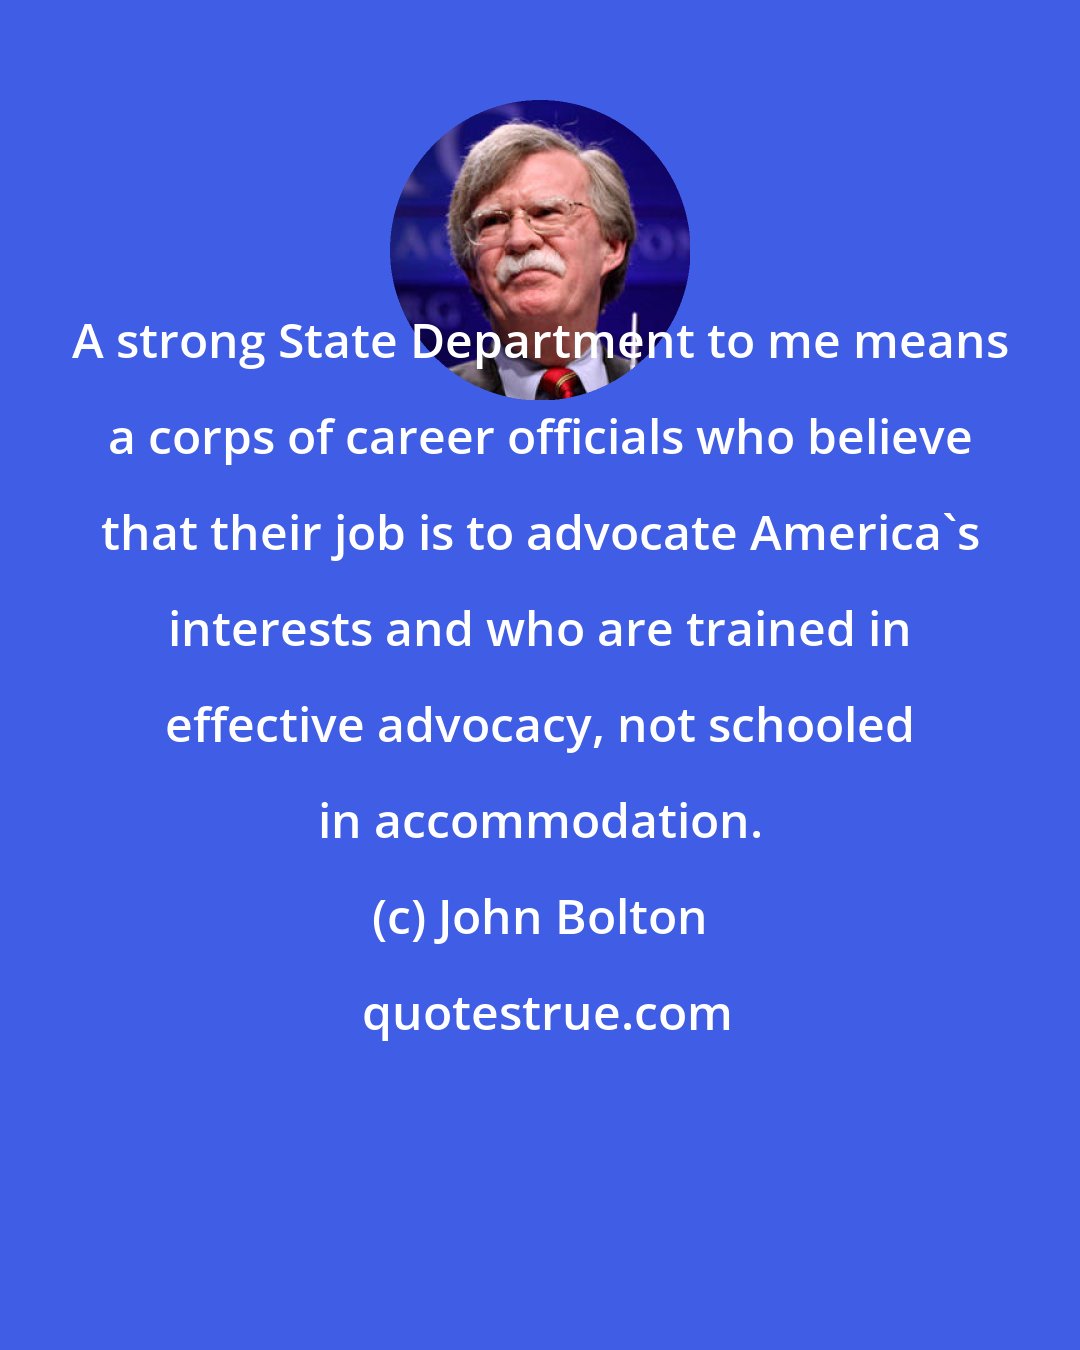 John Bolton: A strong State Department to me means a corps of career officials who believe that their job is to advocate America's interests and who are trained in effective advocacy, not schooled in accommodation.